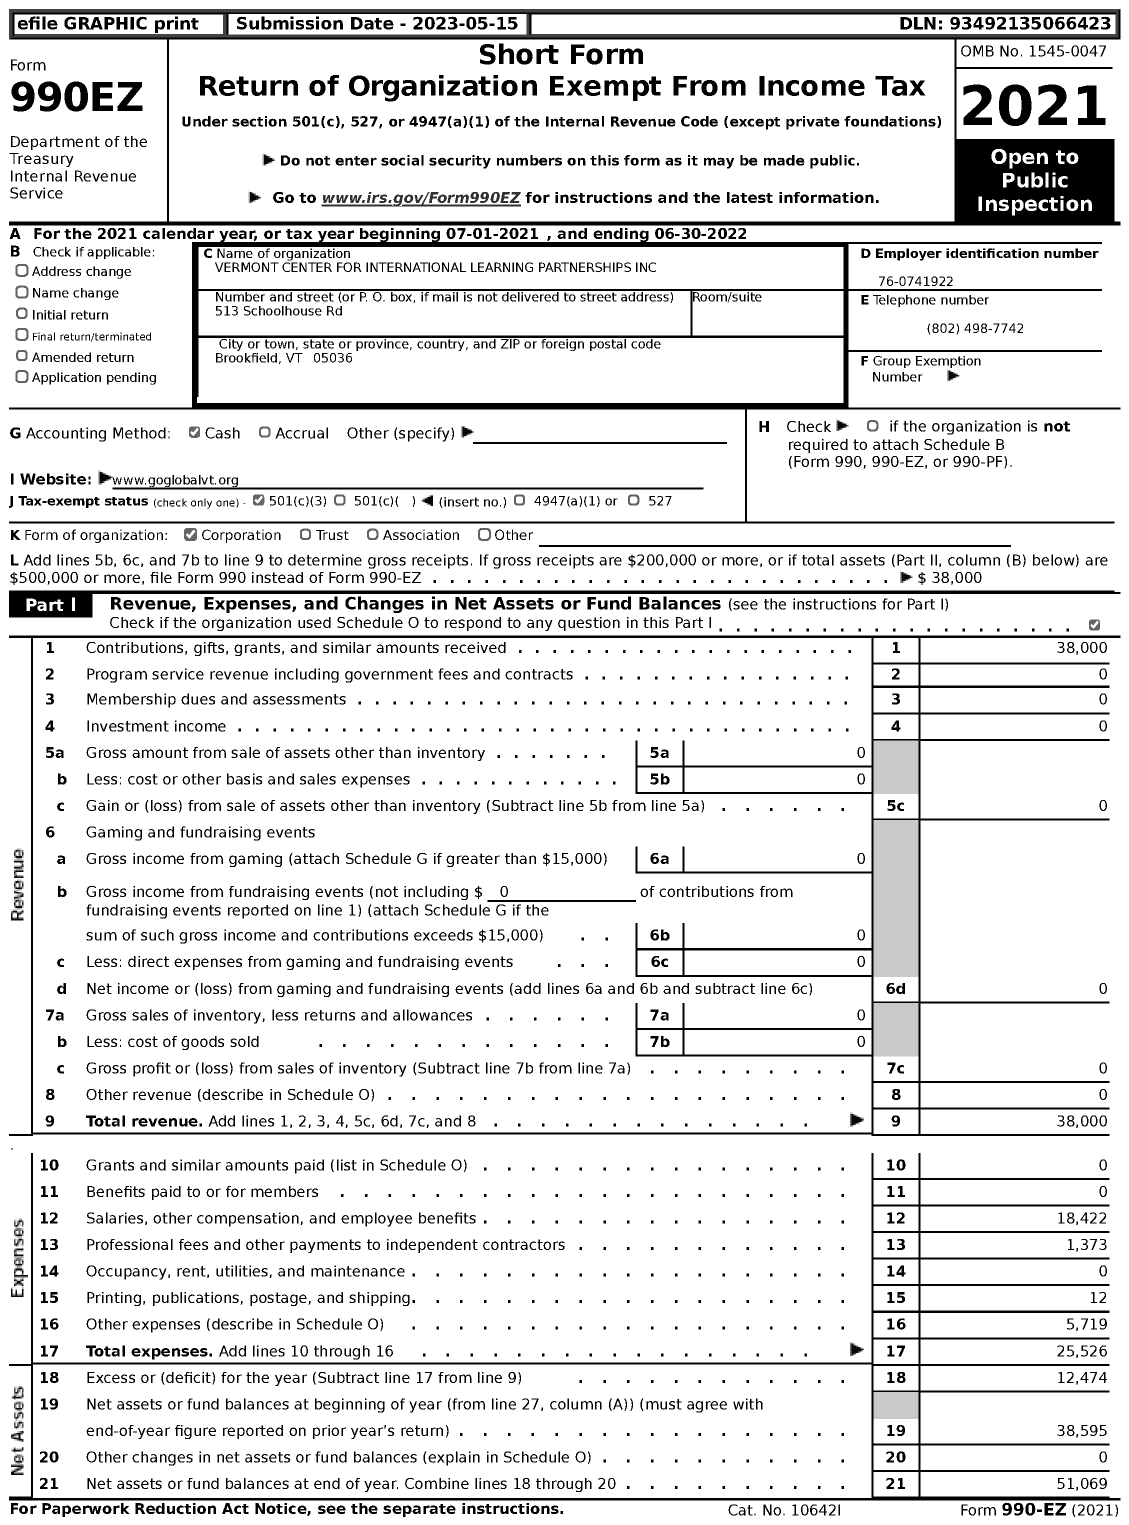 Image of first page of 2021 Form 990EZ for Vermont Center for International Learning Partnerships